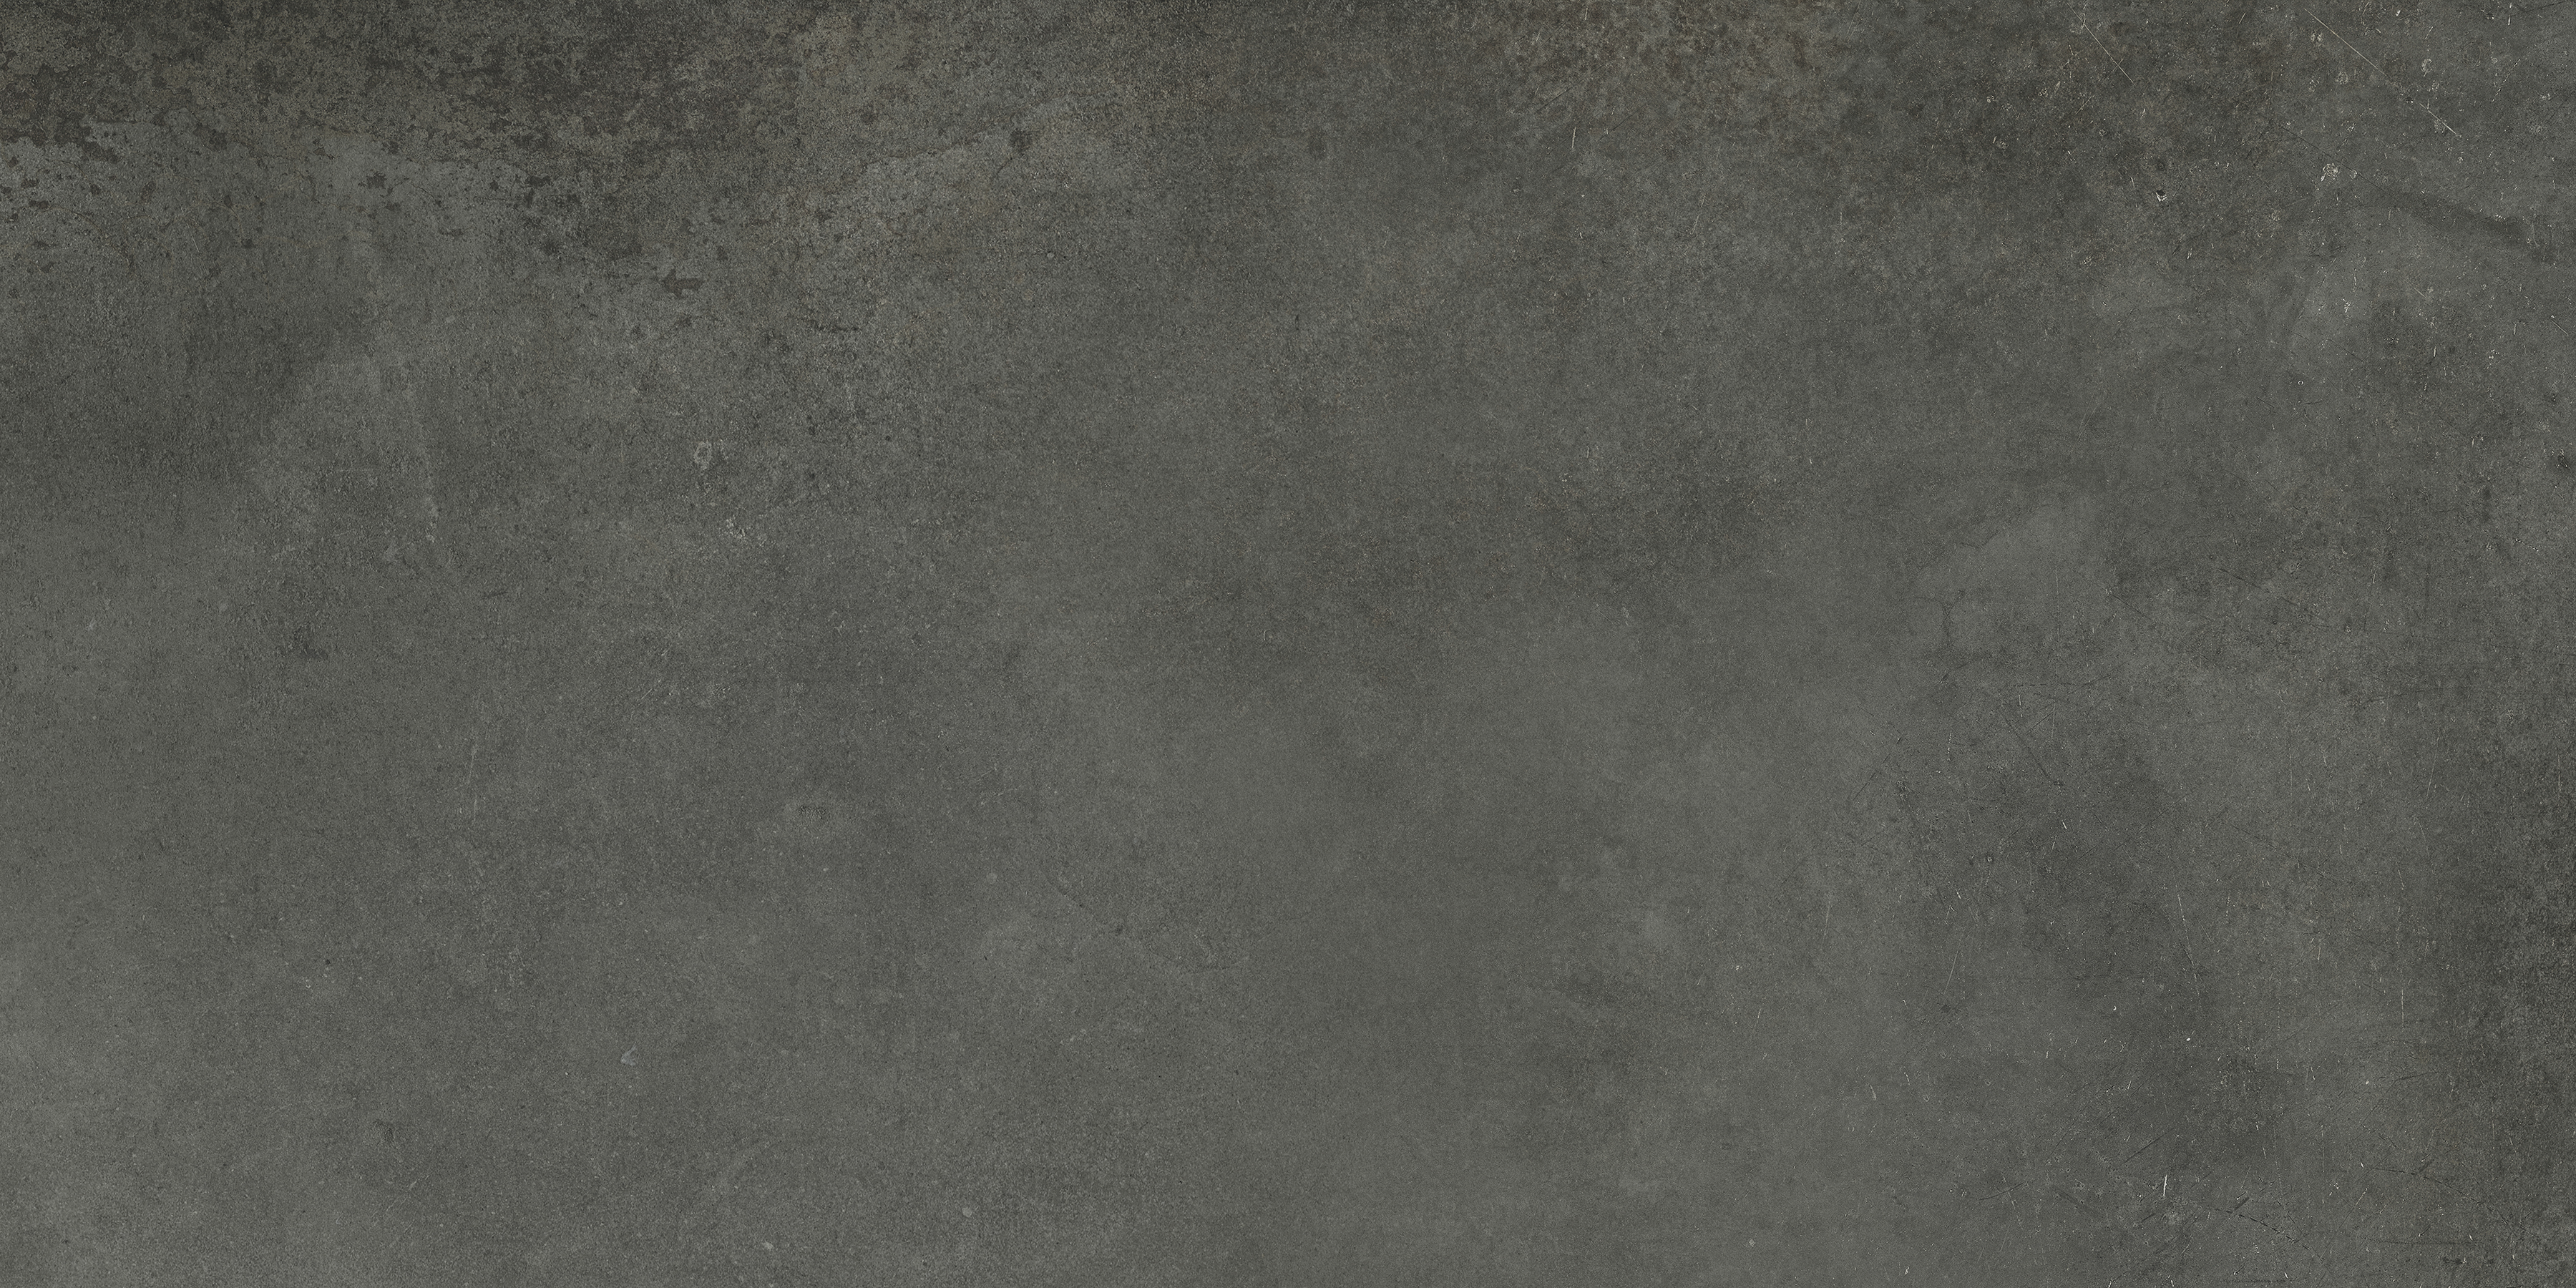 oxide pattern color body porcelain field tile from ceraforge anatolia collection distributed by surface group international matte finish rectified edge 12x24 rectangle shape